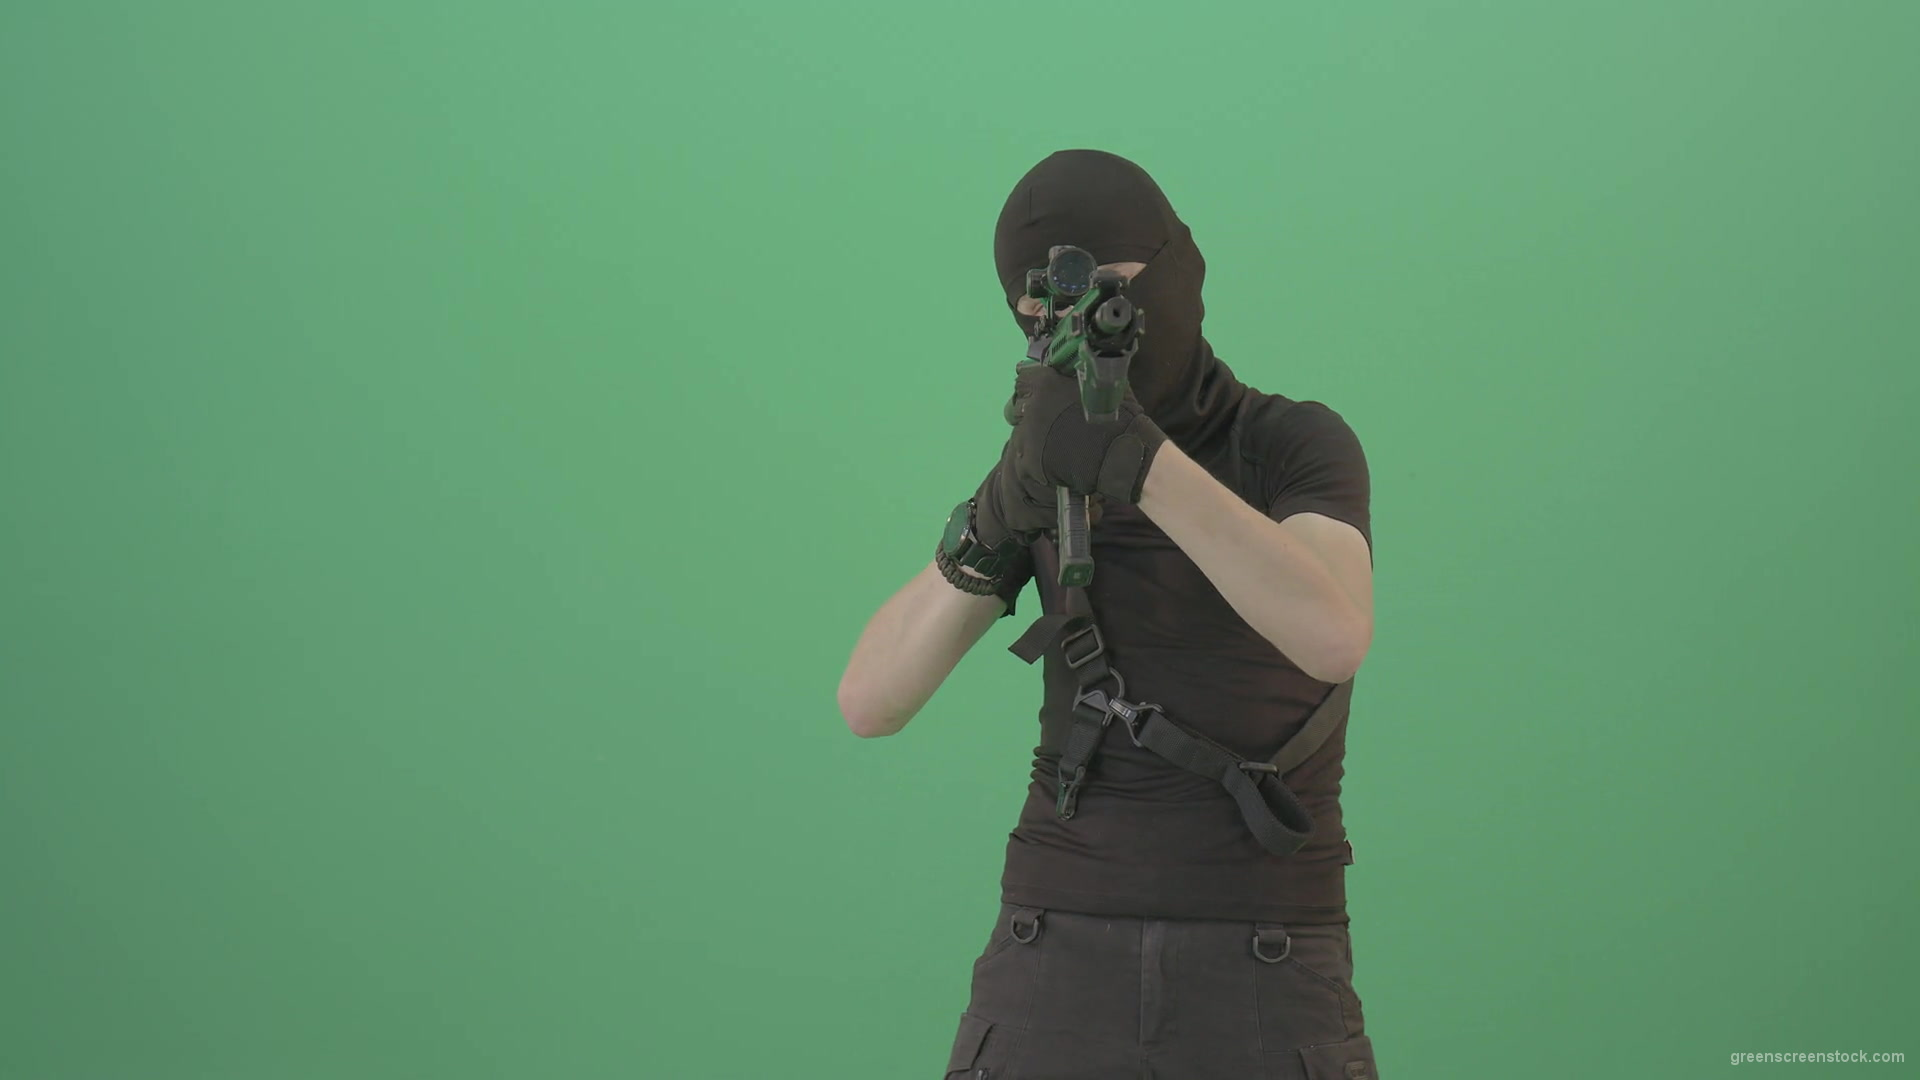 Soldier-in-black-mask-shooting-enemies-with-military-gun-on-green-screen-4K-Video-Footage-1920_008 Green Screen Stock